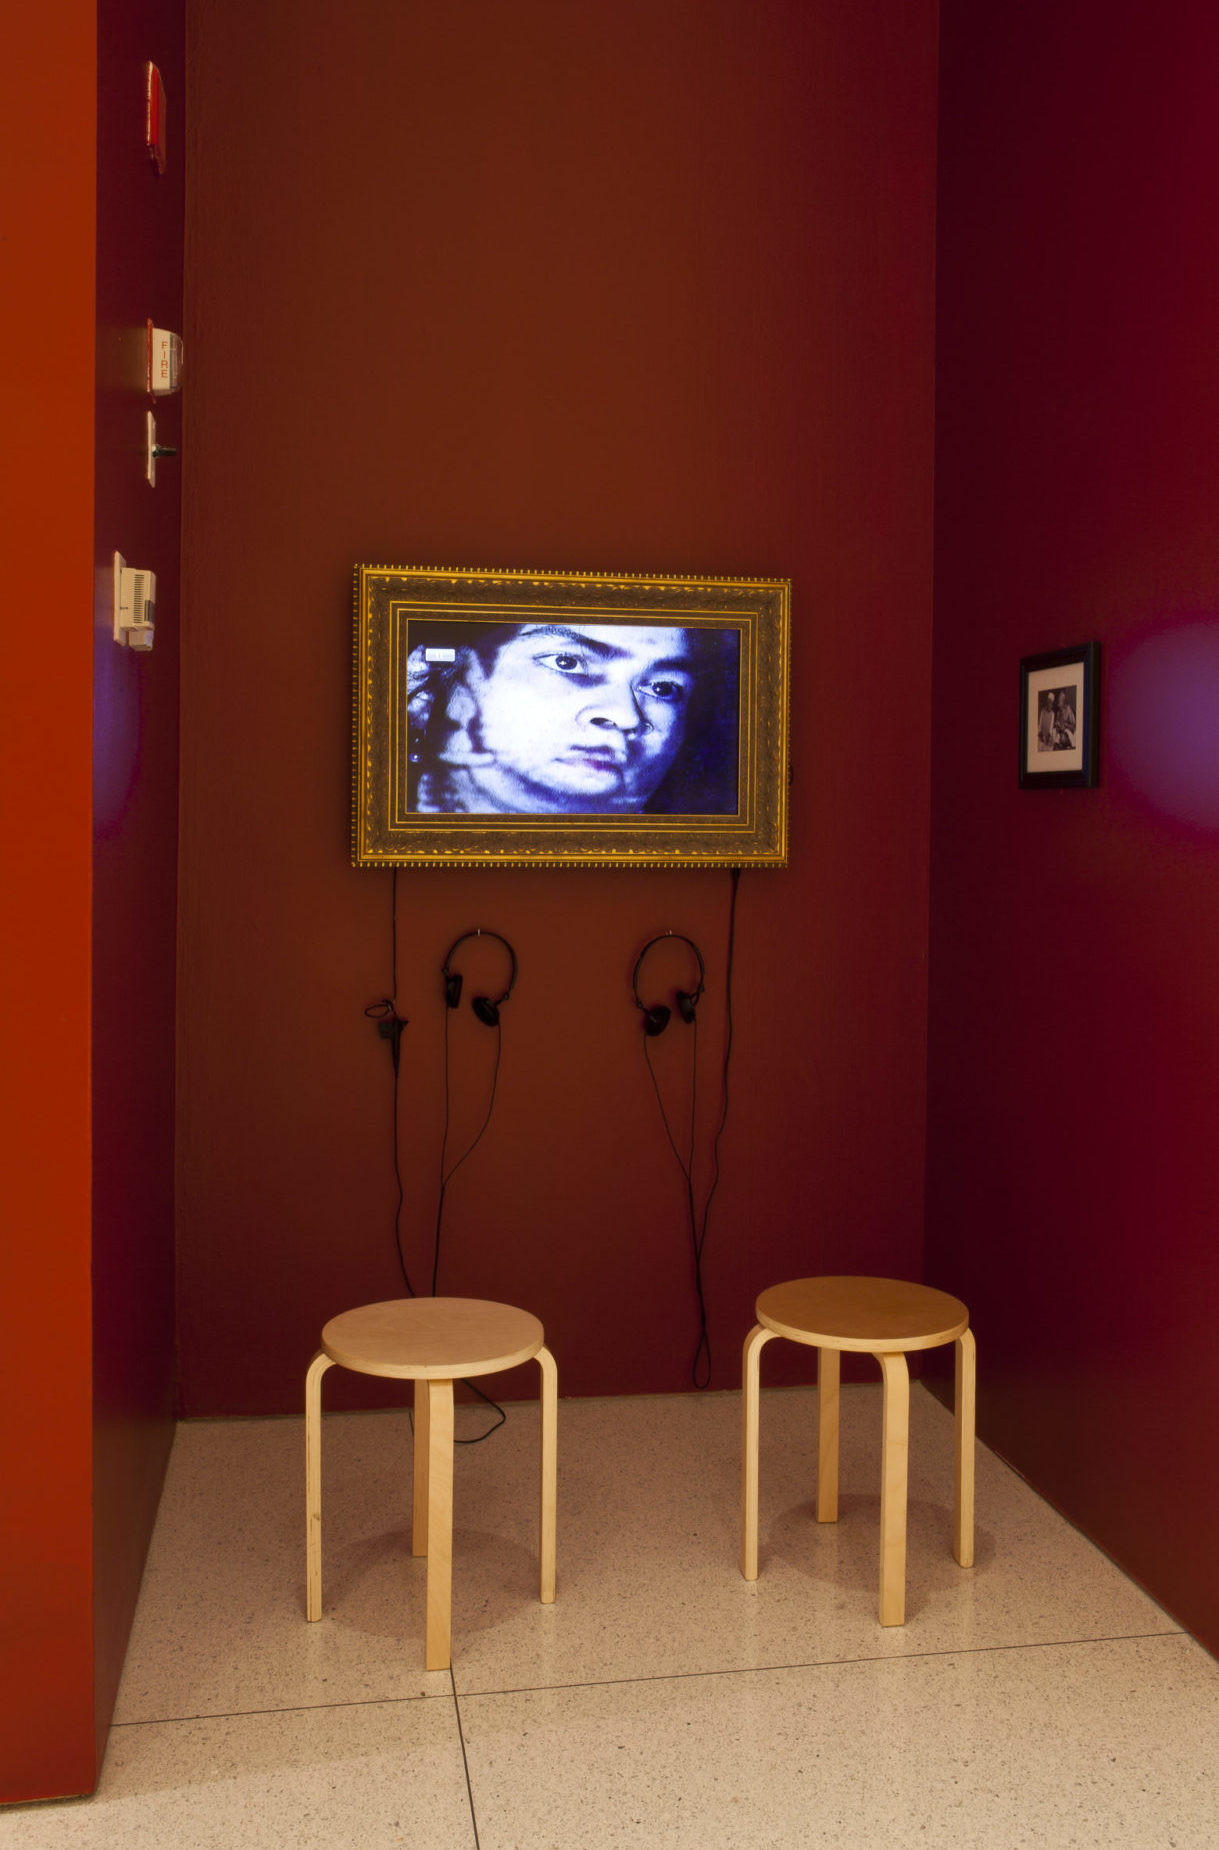 A small red room with a digital image hanging in the center of the front facing wall. The image appears to be a human face close up, and looking to the right and is framed in a gold border. Underneath the image is a pair of black headphones connected to it, and a pair of wooden stools for sitting. On both sides of the wall there are small pictures hanging up and framed.